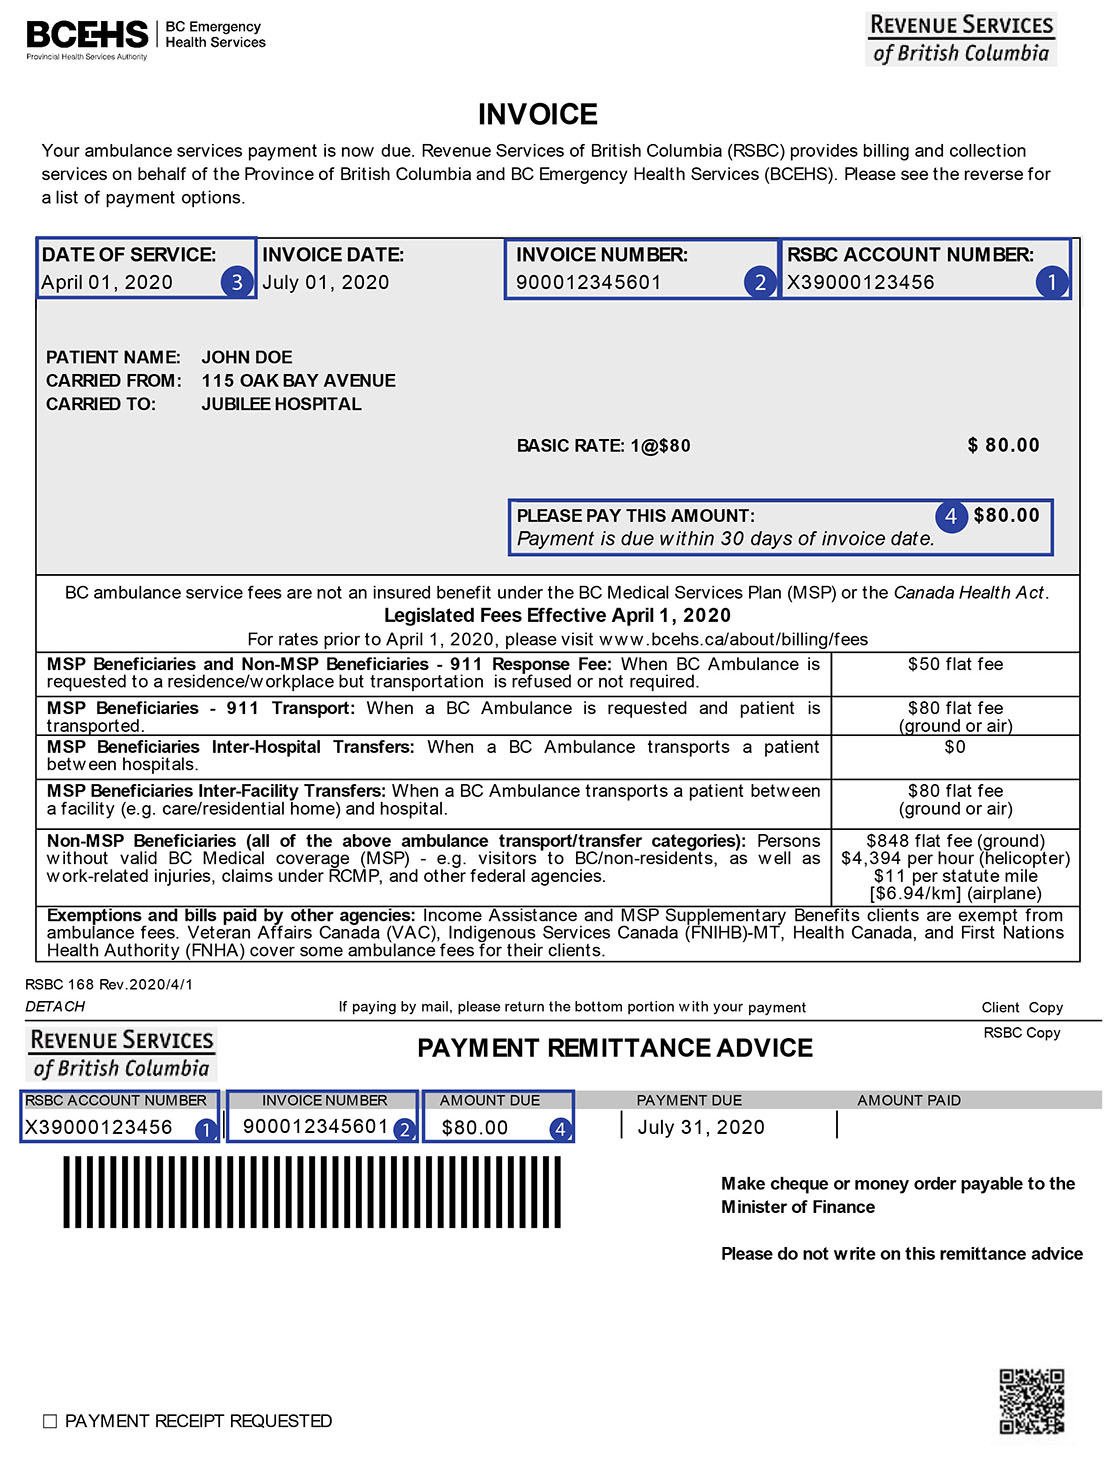 Invoice for ambulance services from BC Emergency Health Services and Revenue Services of British Columbia.